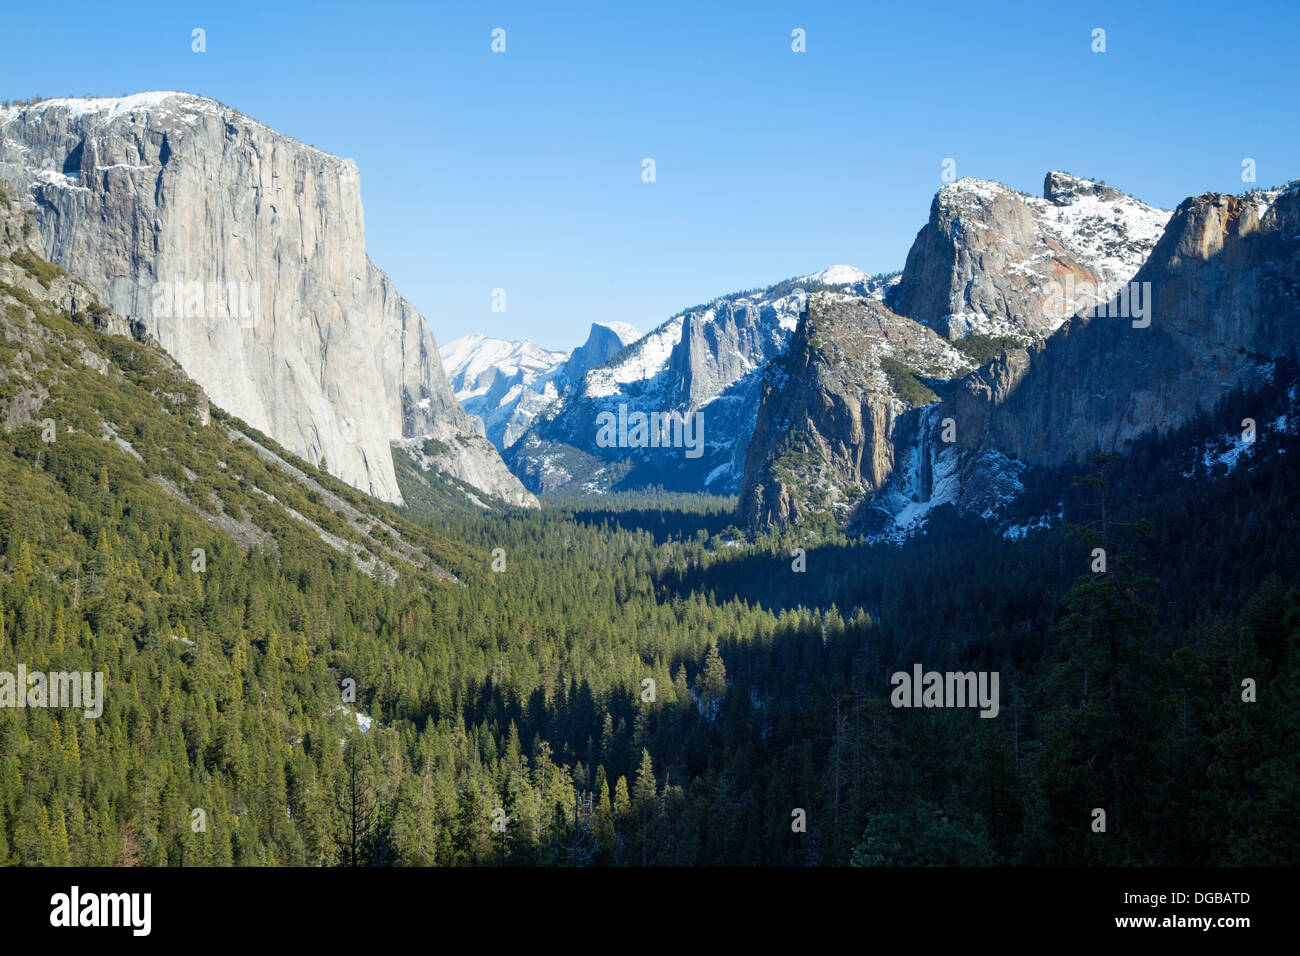 The Tunnel View overlooking Yosemite Valley, California Stock Photo